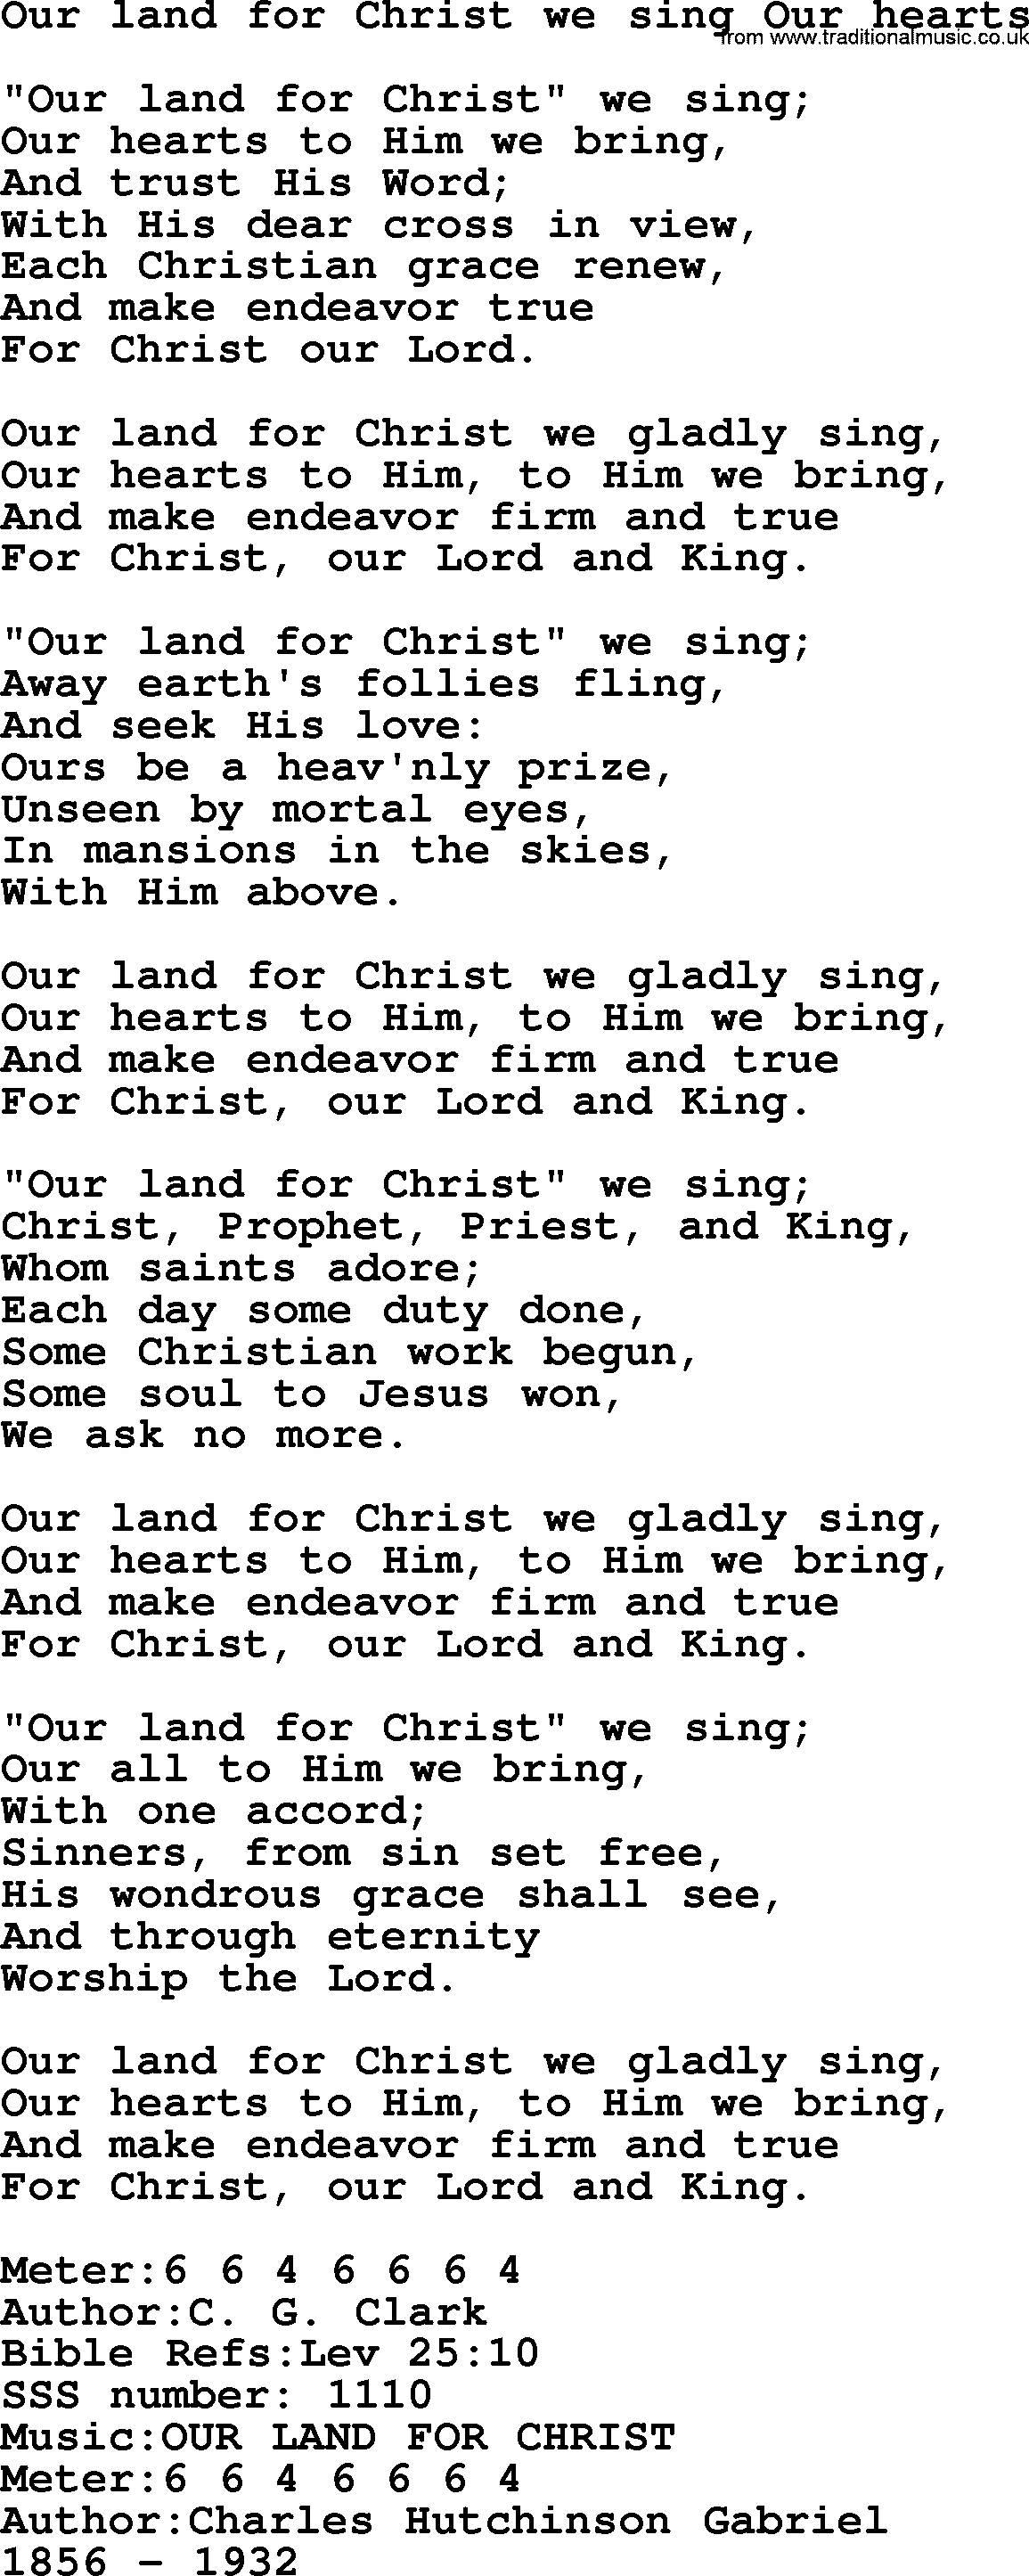 Sacred Songs and Solos complete, 1200 Hymns, title: Our Land For Christ We Sing Our Hearts, lyrics and PDF